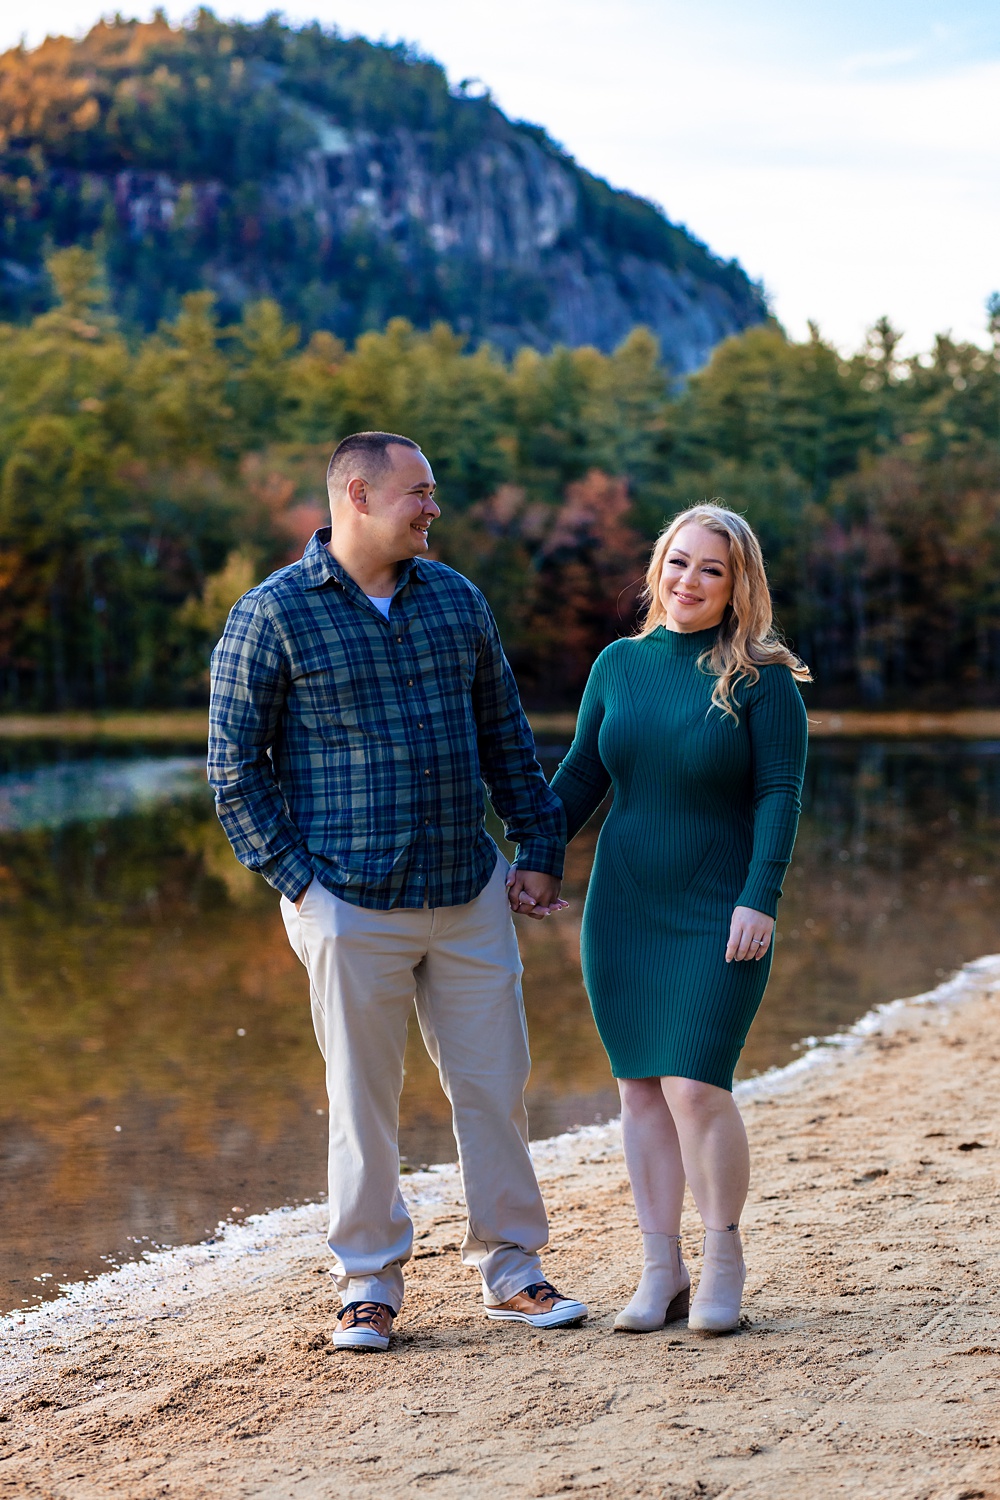 Smiling during their New Hampshire engagement session